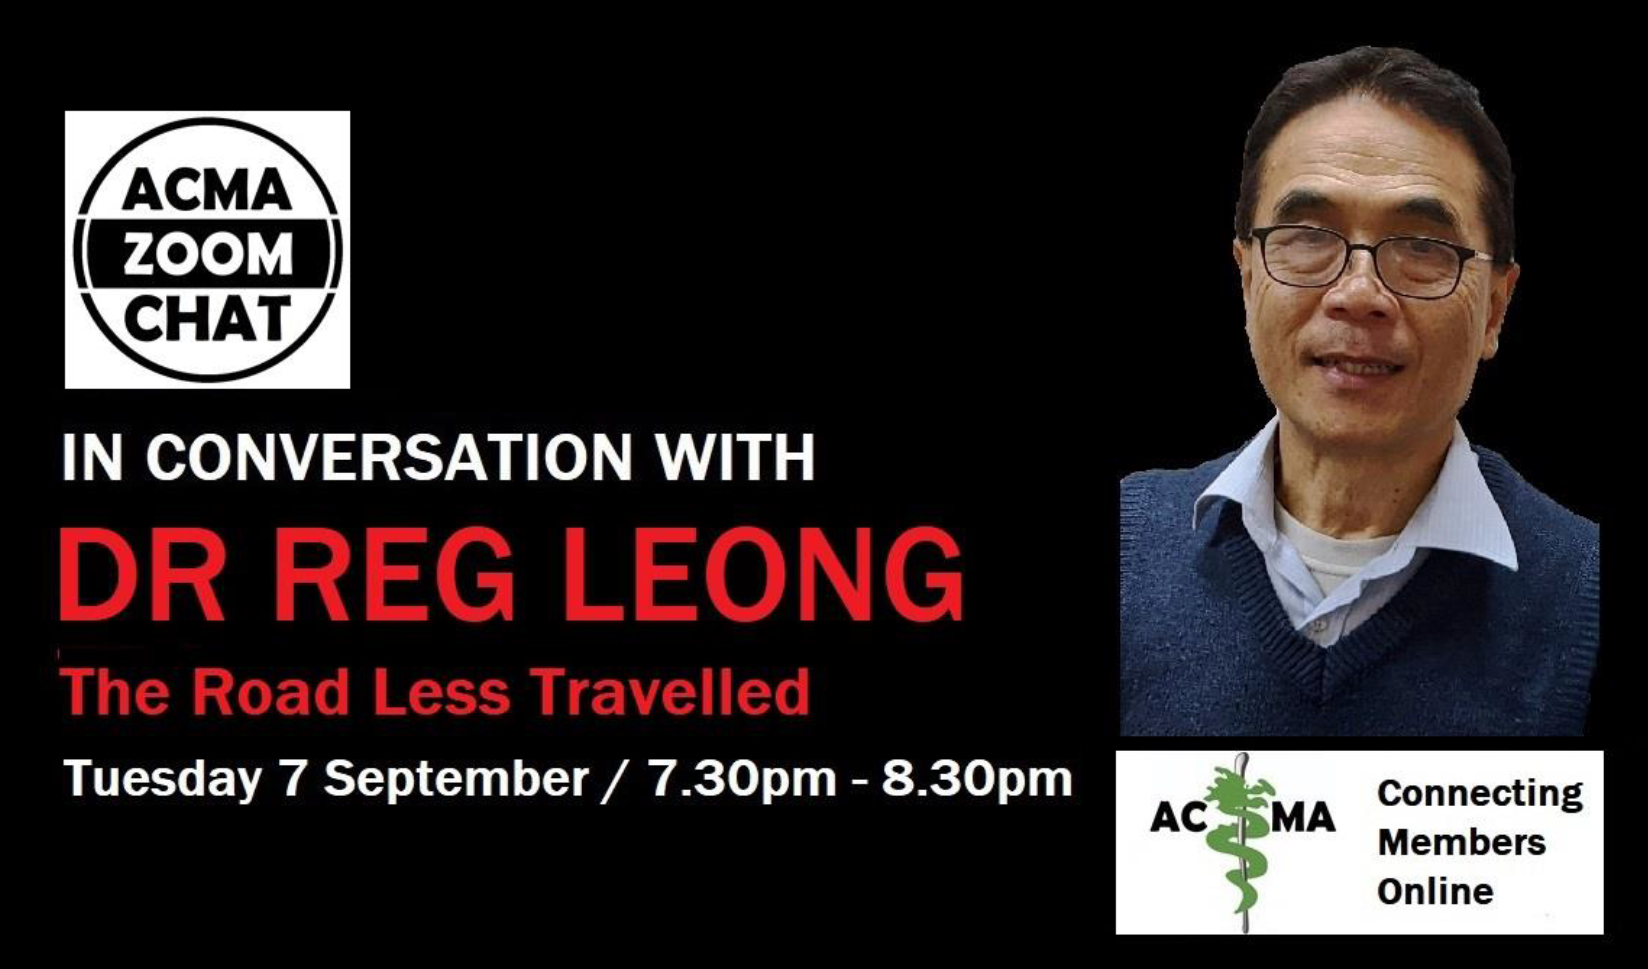 ACMA Chat Event Banner, featuring Dr Reg Leong